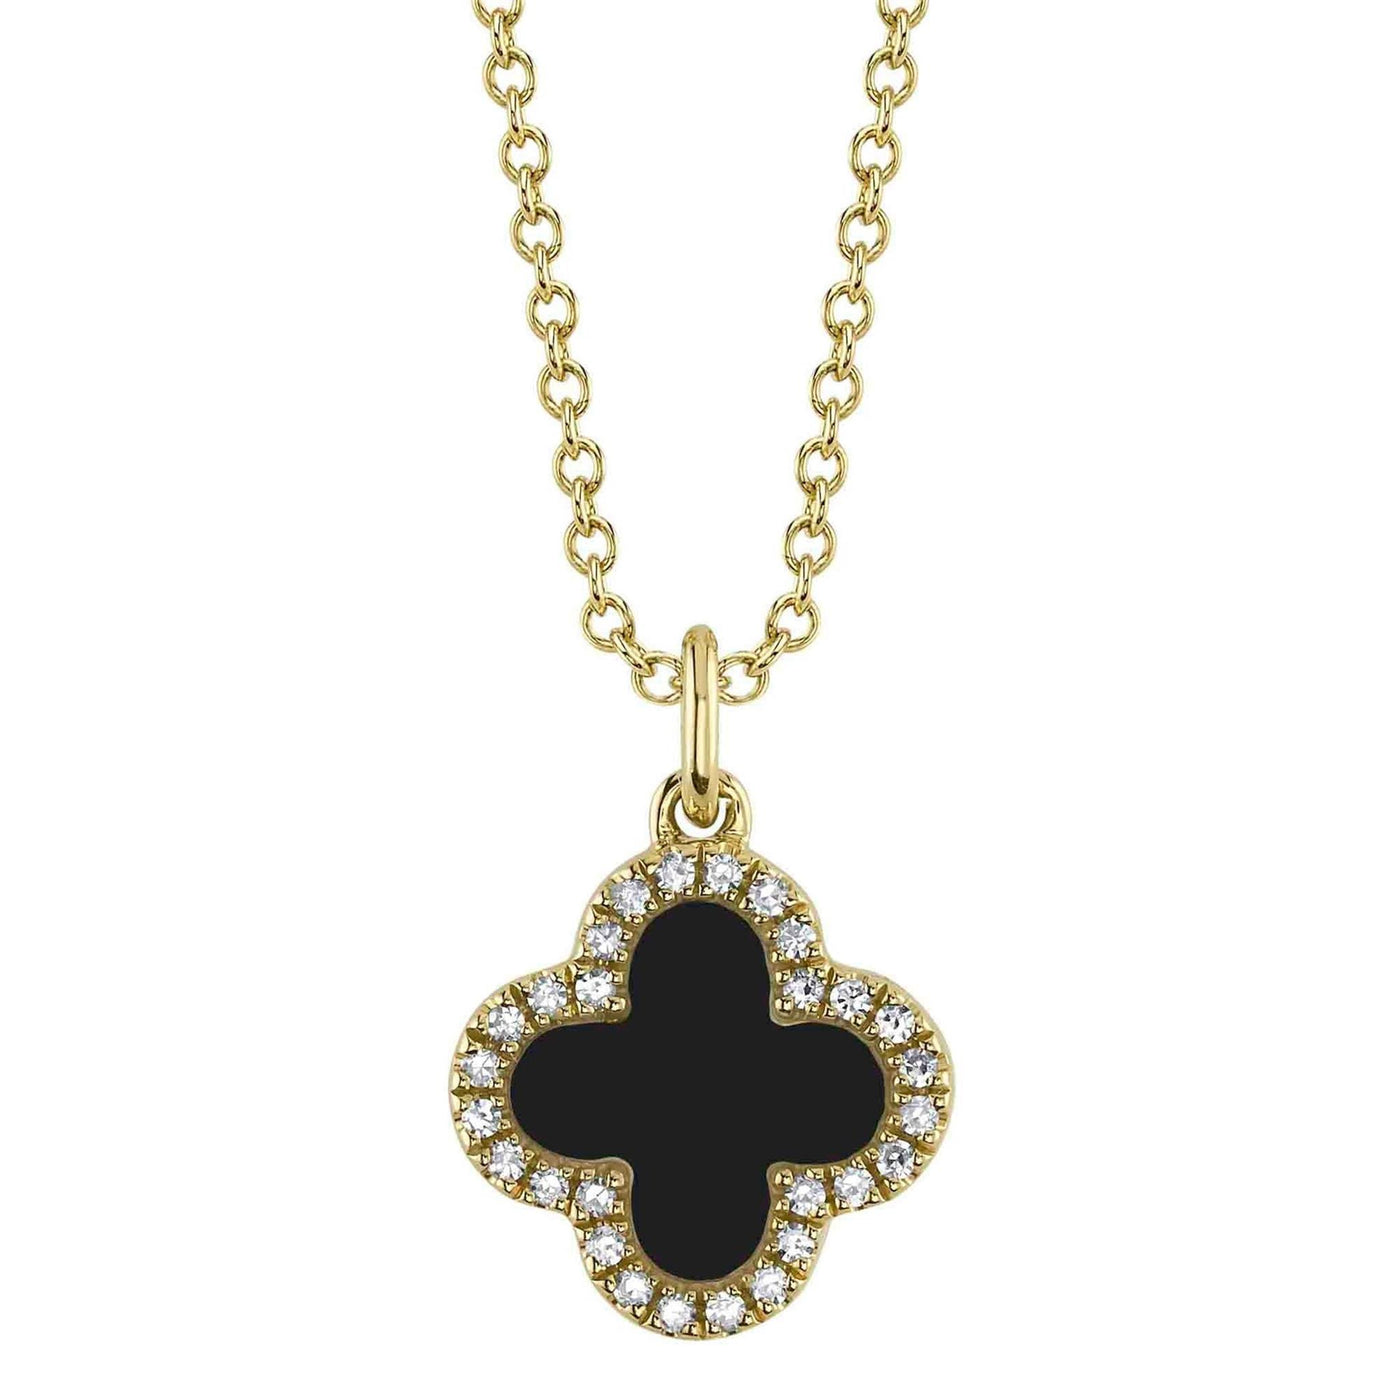 Shy Creation 14K Yellow Gold 1.03ctw Double Sided Clover Style Onyx Necklace